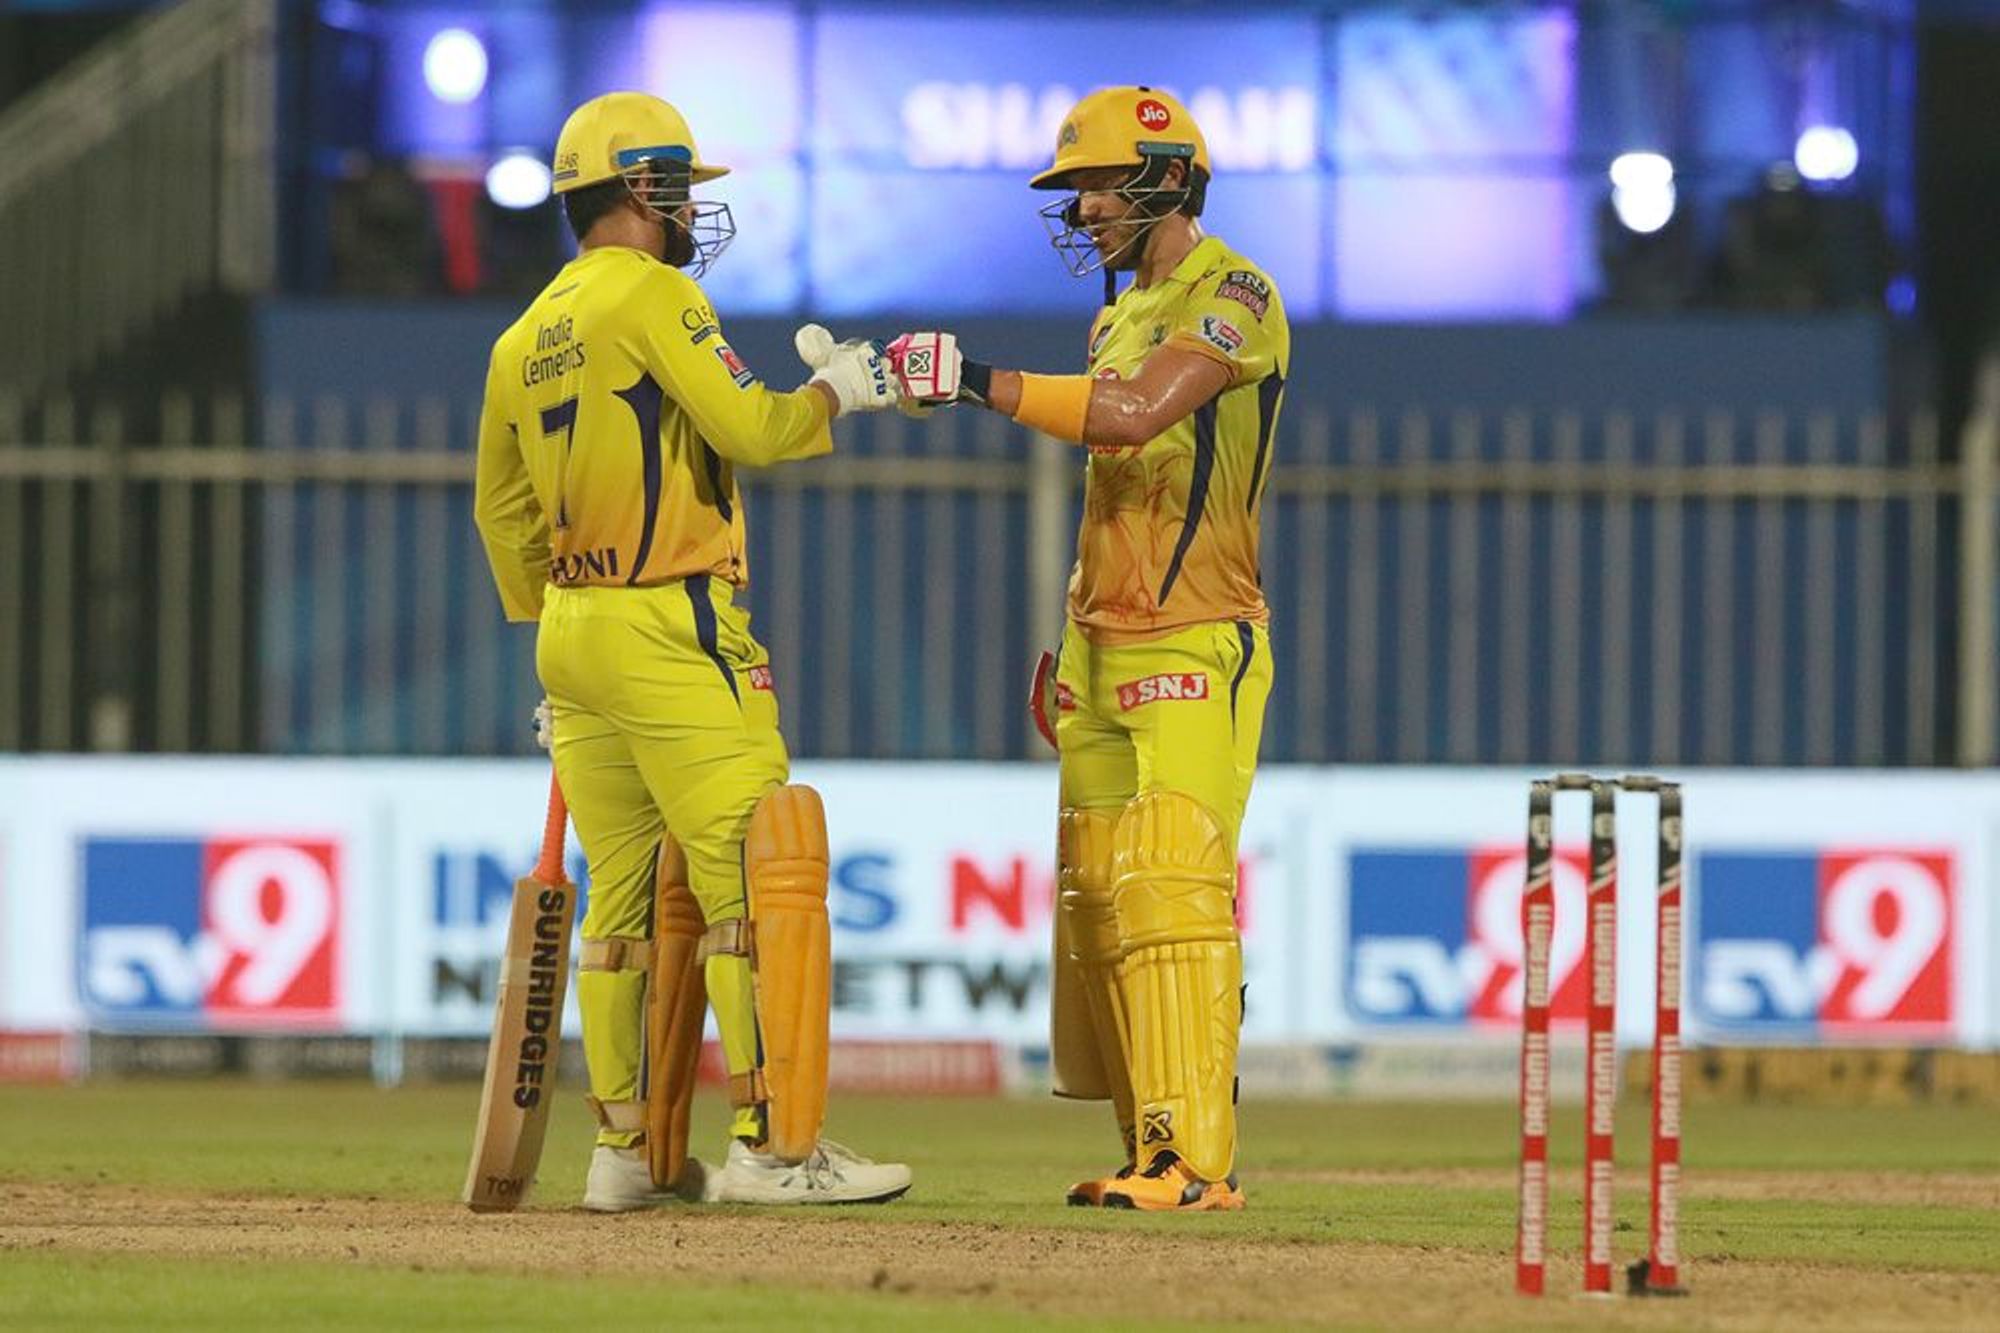 IPL 2020 | Dhoni might have demoted himself to see how CSK’s future fares, feels Harsha Bhogle